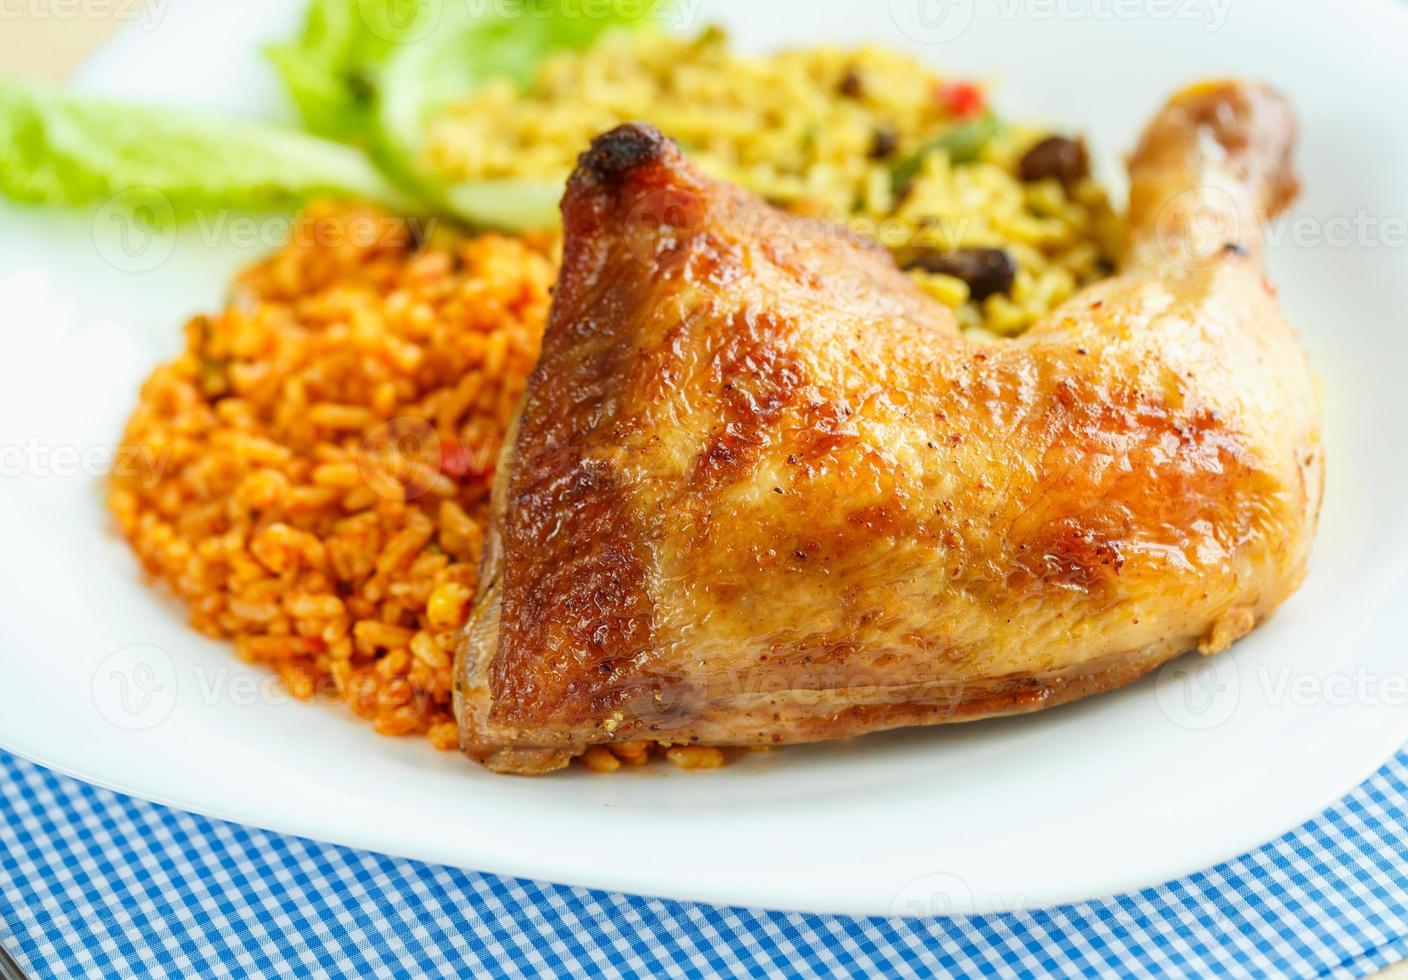 Delicious dish of chicken thigh with rice and salad leaves photo